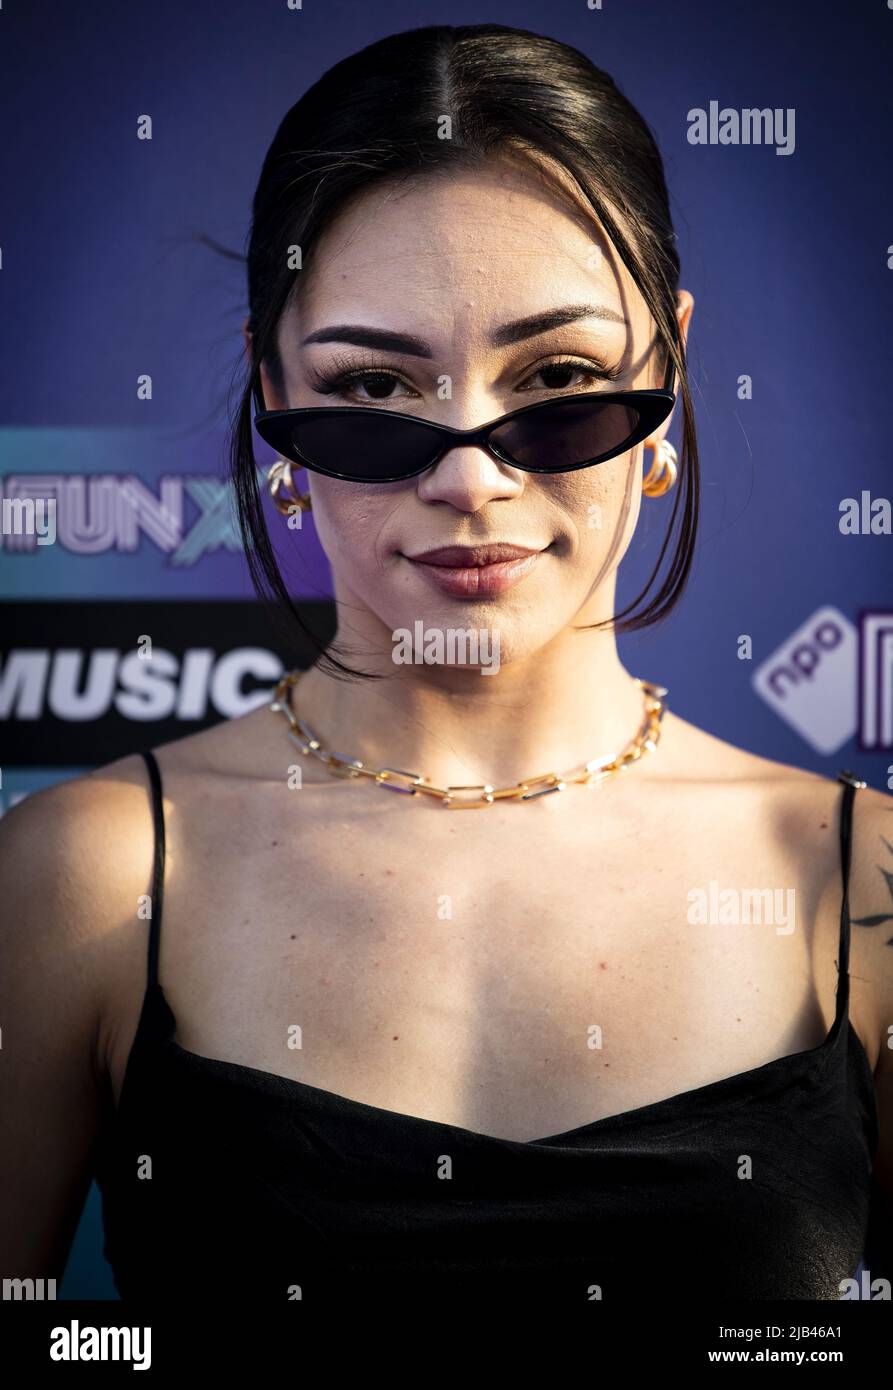 2022-06-02 19:51:03 AMSTERDAM - Sarita Lorena on the purple carpet for the FunX Music Awards in AFAS Live in Amsterdam. During the award show, the most important music prizes of the young Netherlands are presented. ANP RAMON VAN FLYMEN netherlands out - belgium out Stock Photo